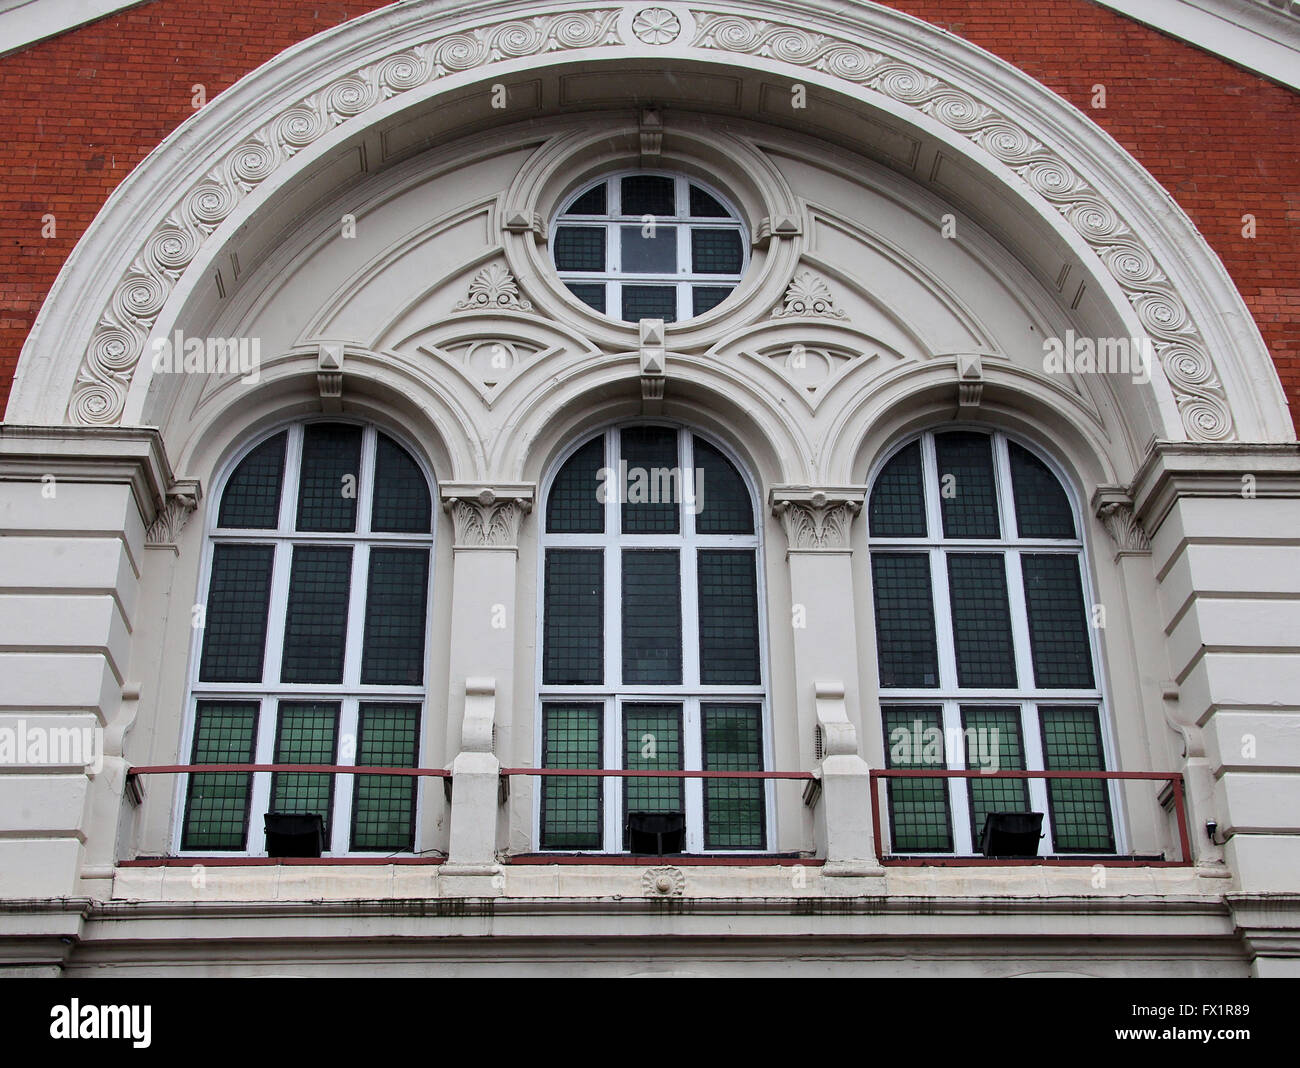 Window of Derby City Church building on Curzon Street Stock Photo